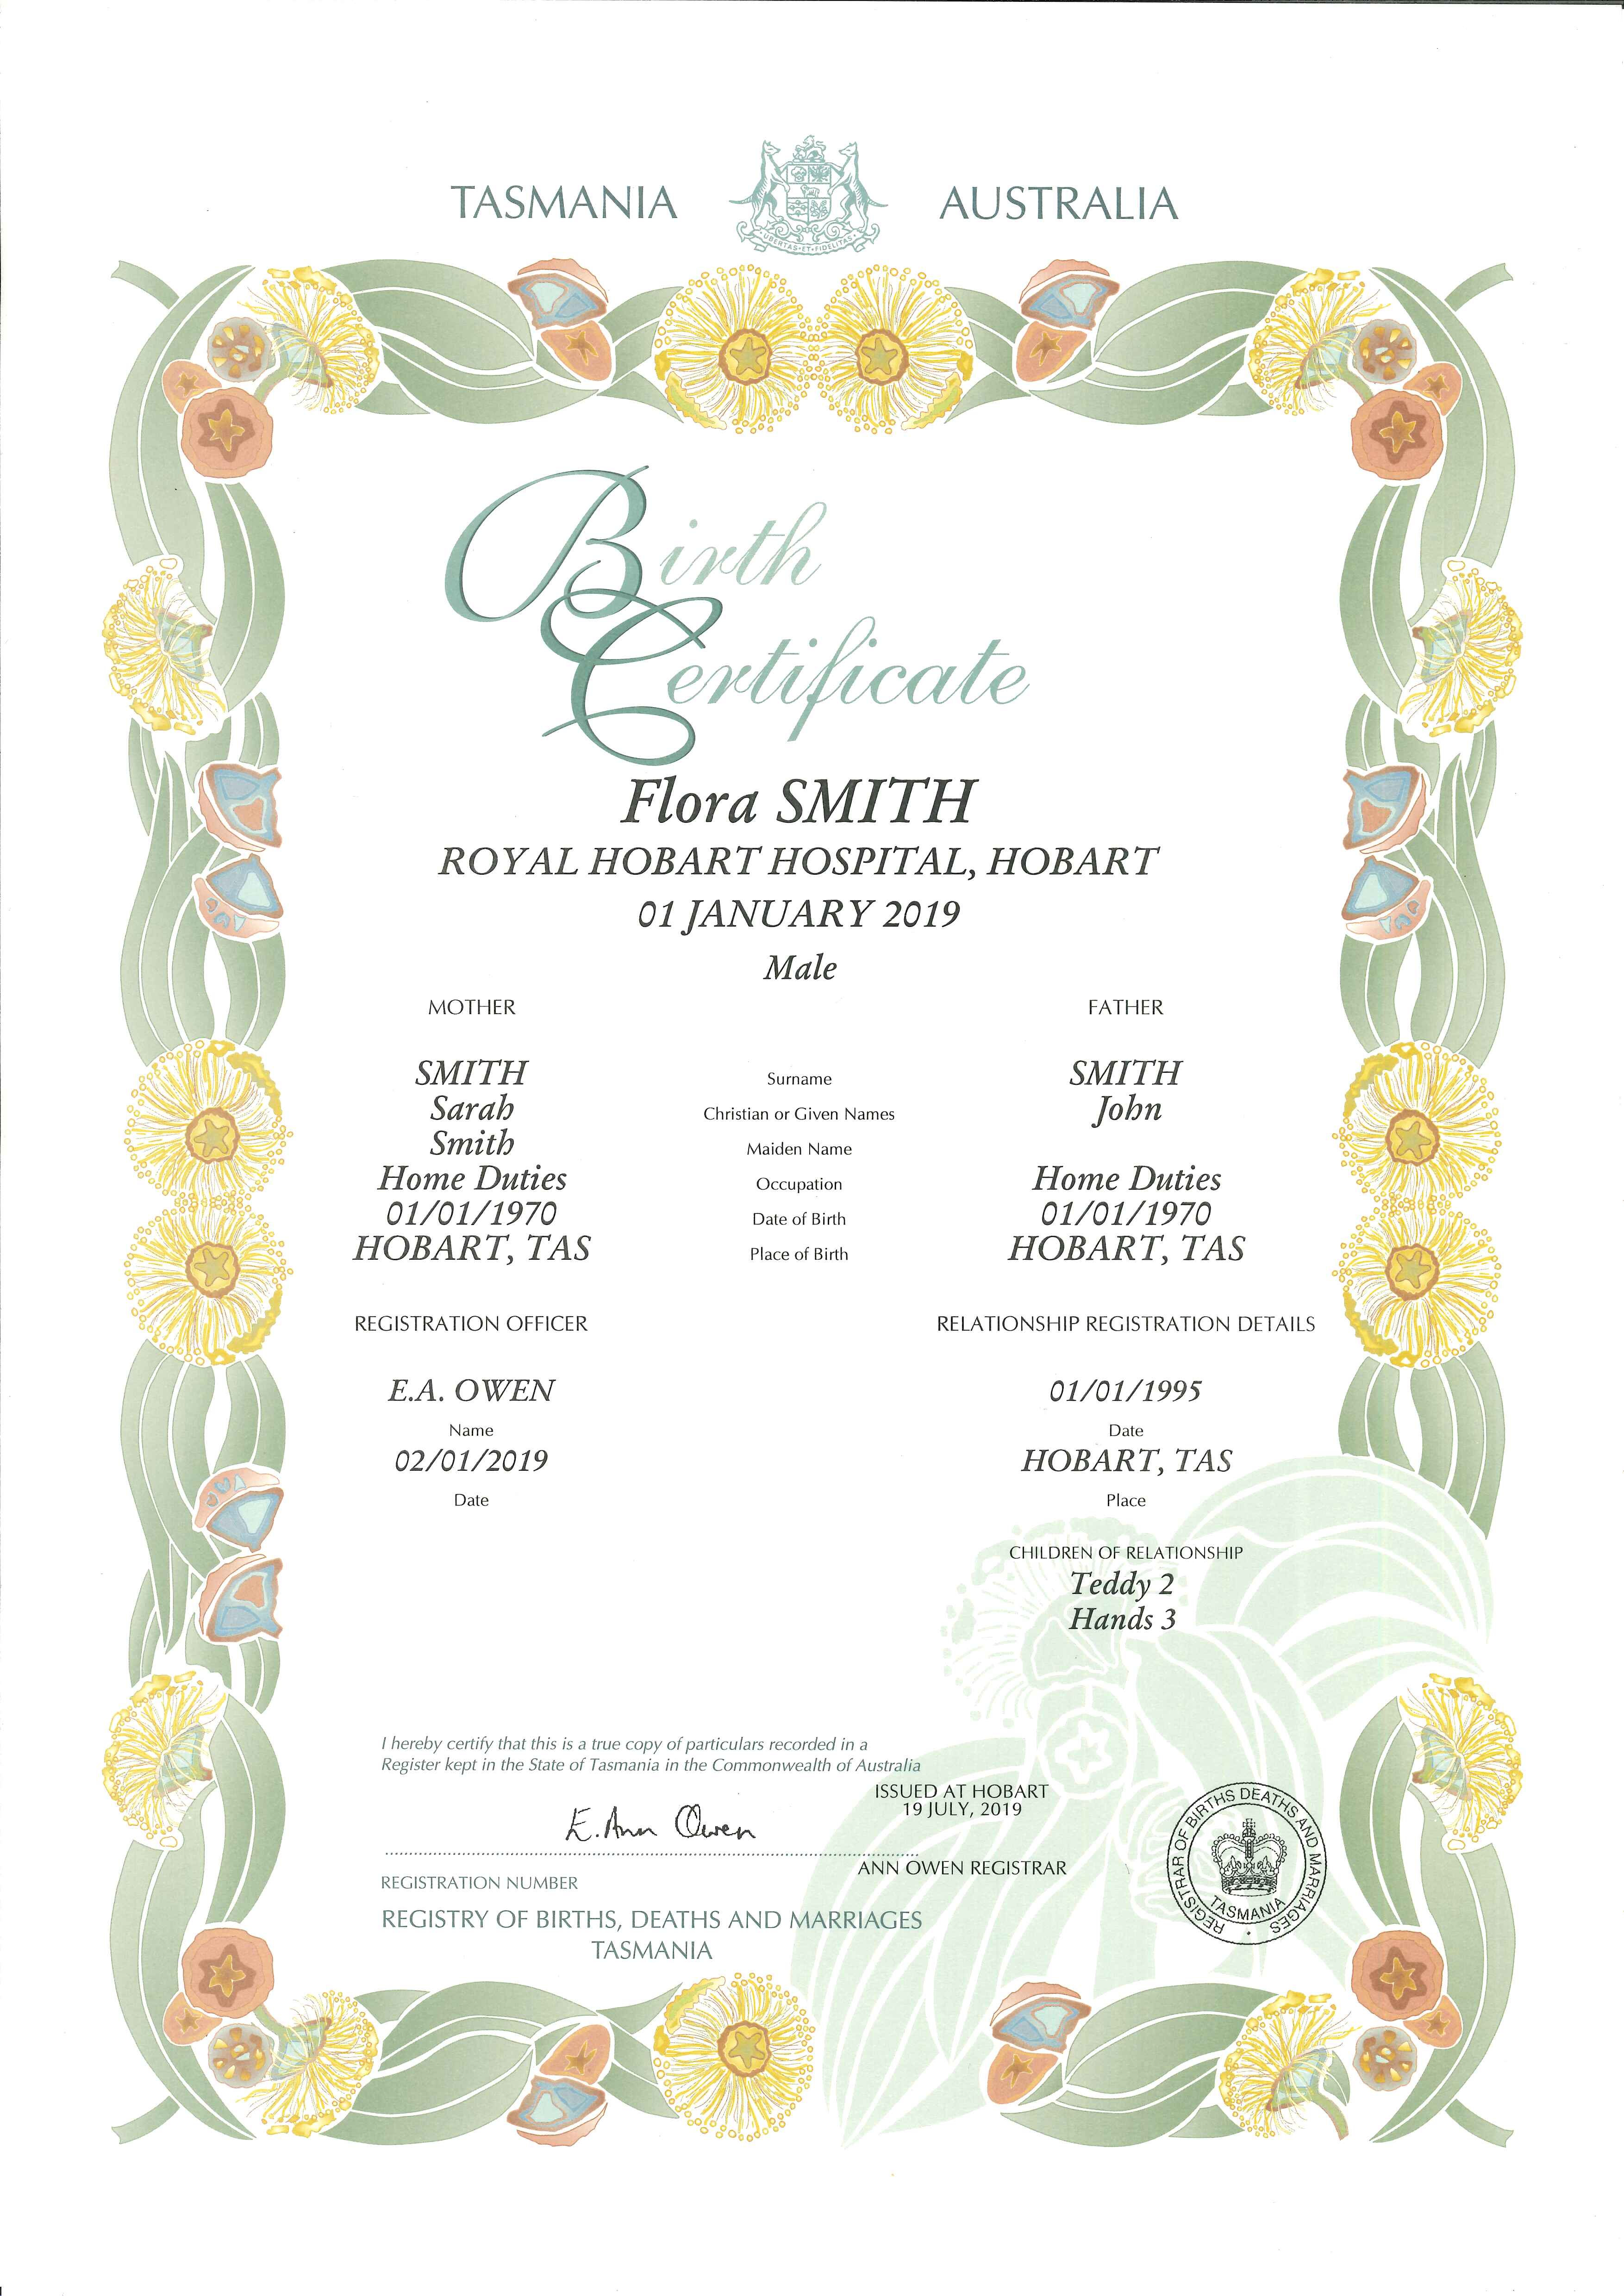 Decorative Birth Certificate. Design consists of a border of Tasmanian native floras, including eucalyptus leaves and gum nuts, in shades of green, gold and brown